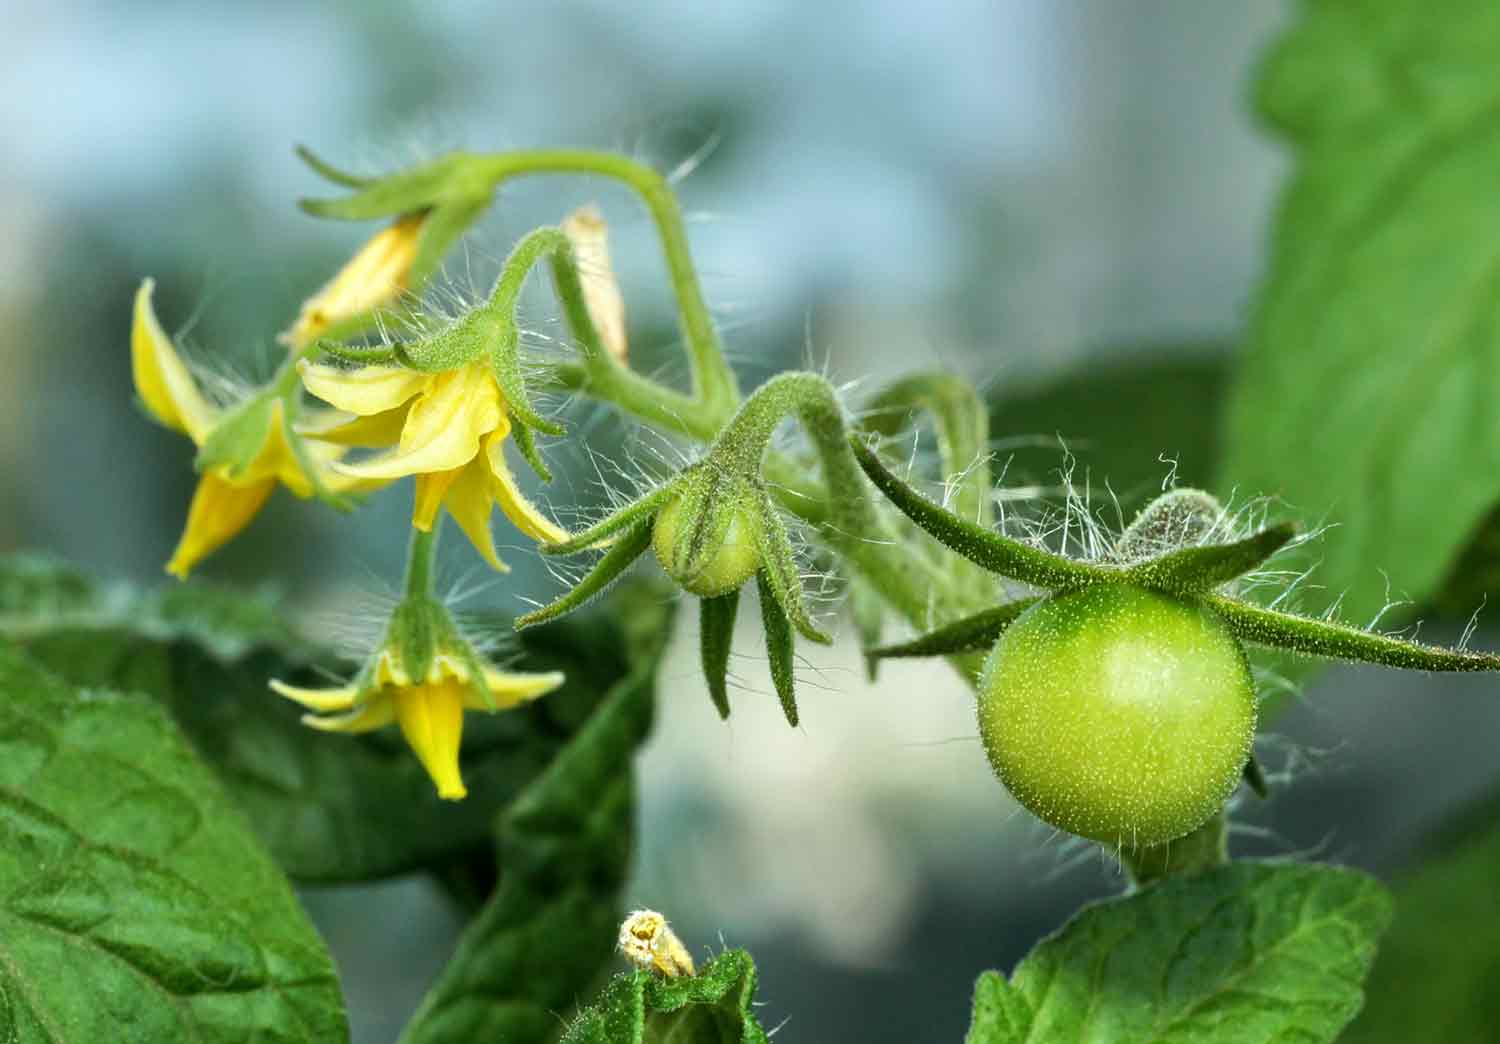 Are Tomatoes Self-Pollinating? - SproutedGarden.com